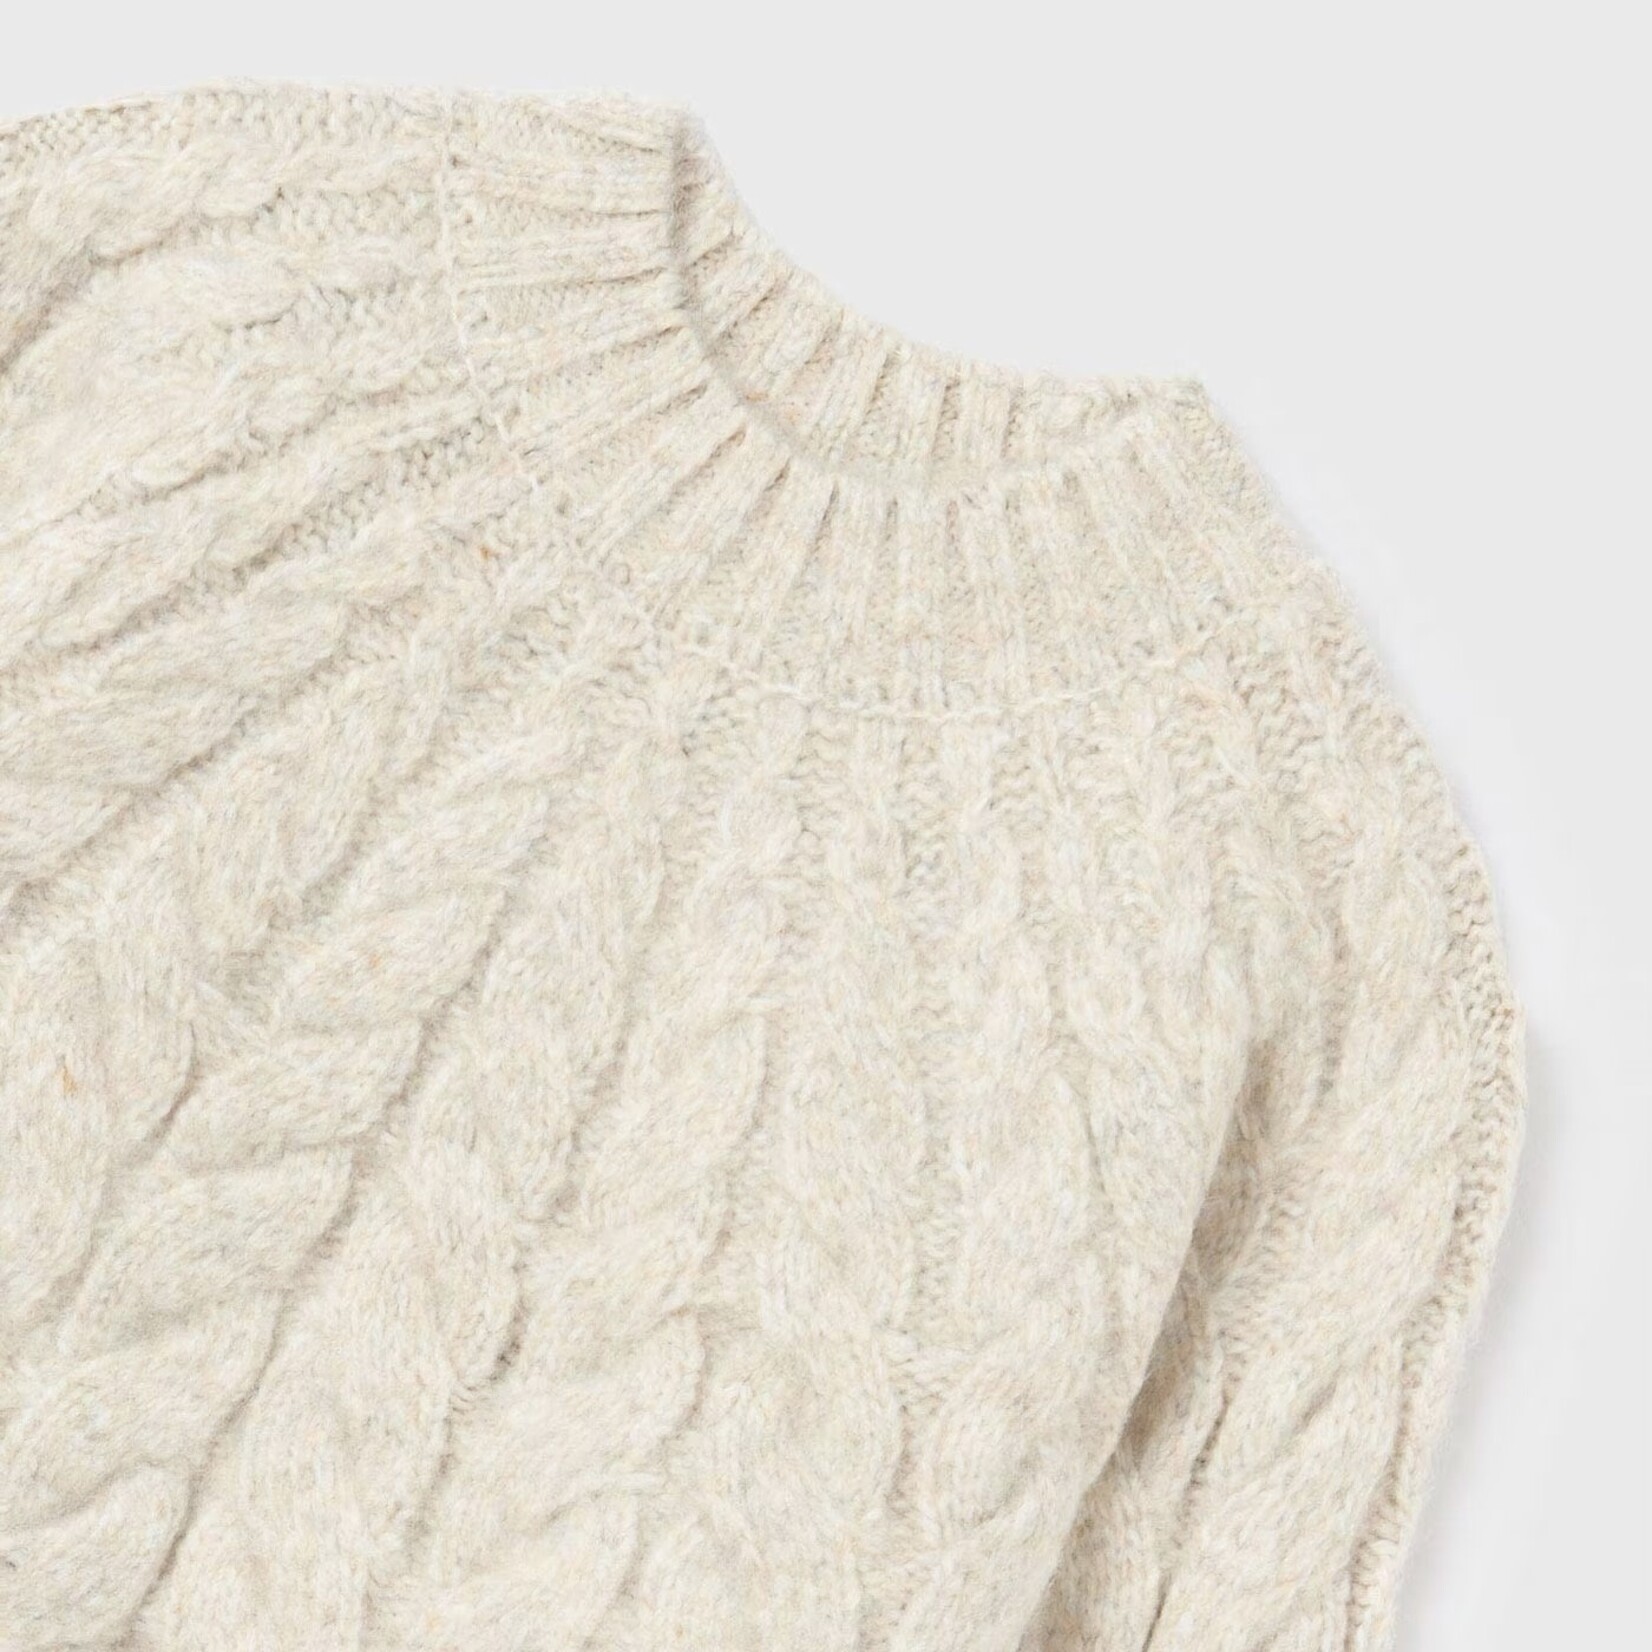 Mayoral Mayoral - Braided Knit Sweater